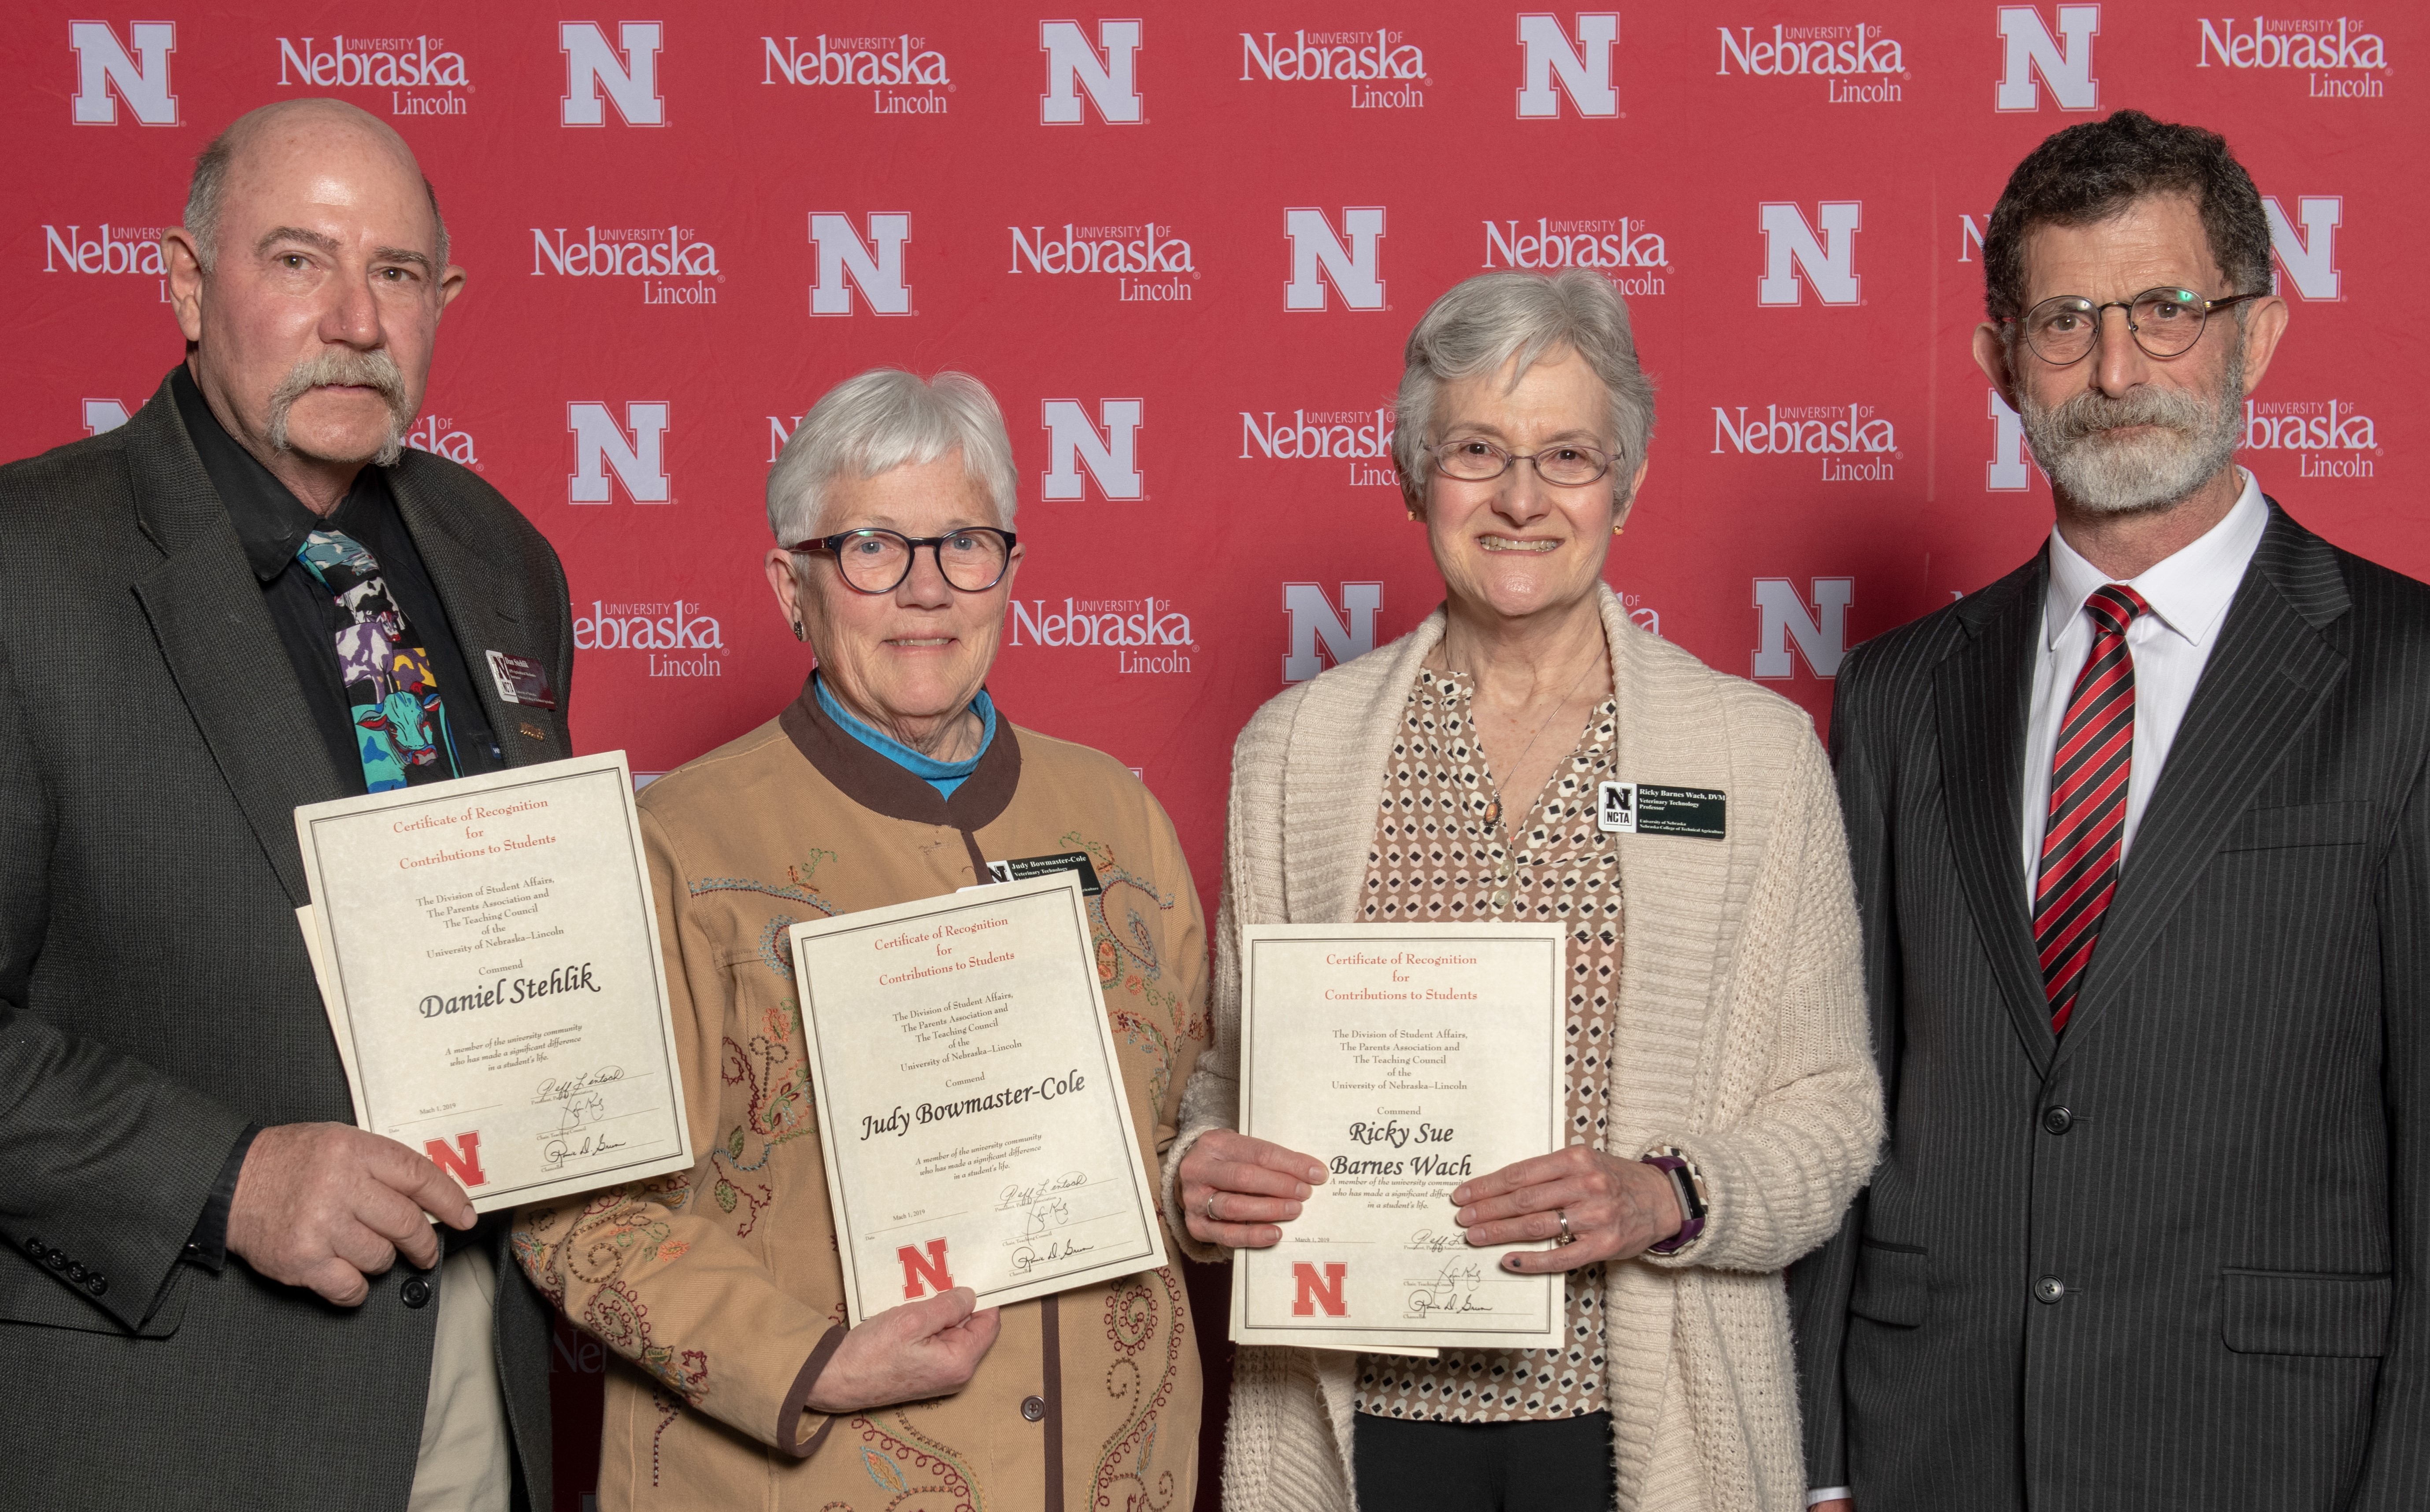 Dan Stehlik, Judy Bowmaster-Cole and Ricky Sue Barnes Wach, DVM, were recognized March 1 by the UNL Parent Association. NCTA Dean Ron Rosati applauds their dedication to students. (UNL University Communication)